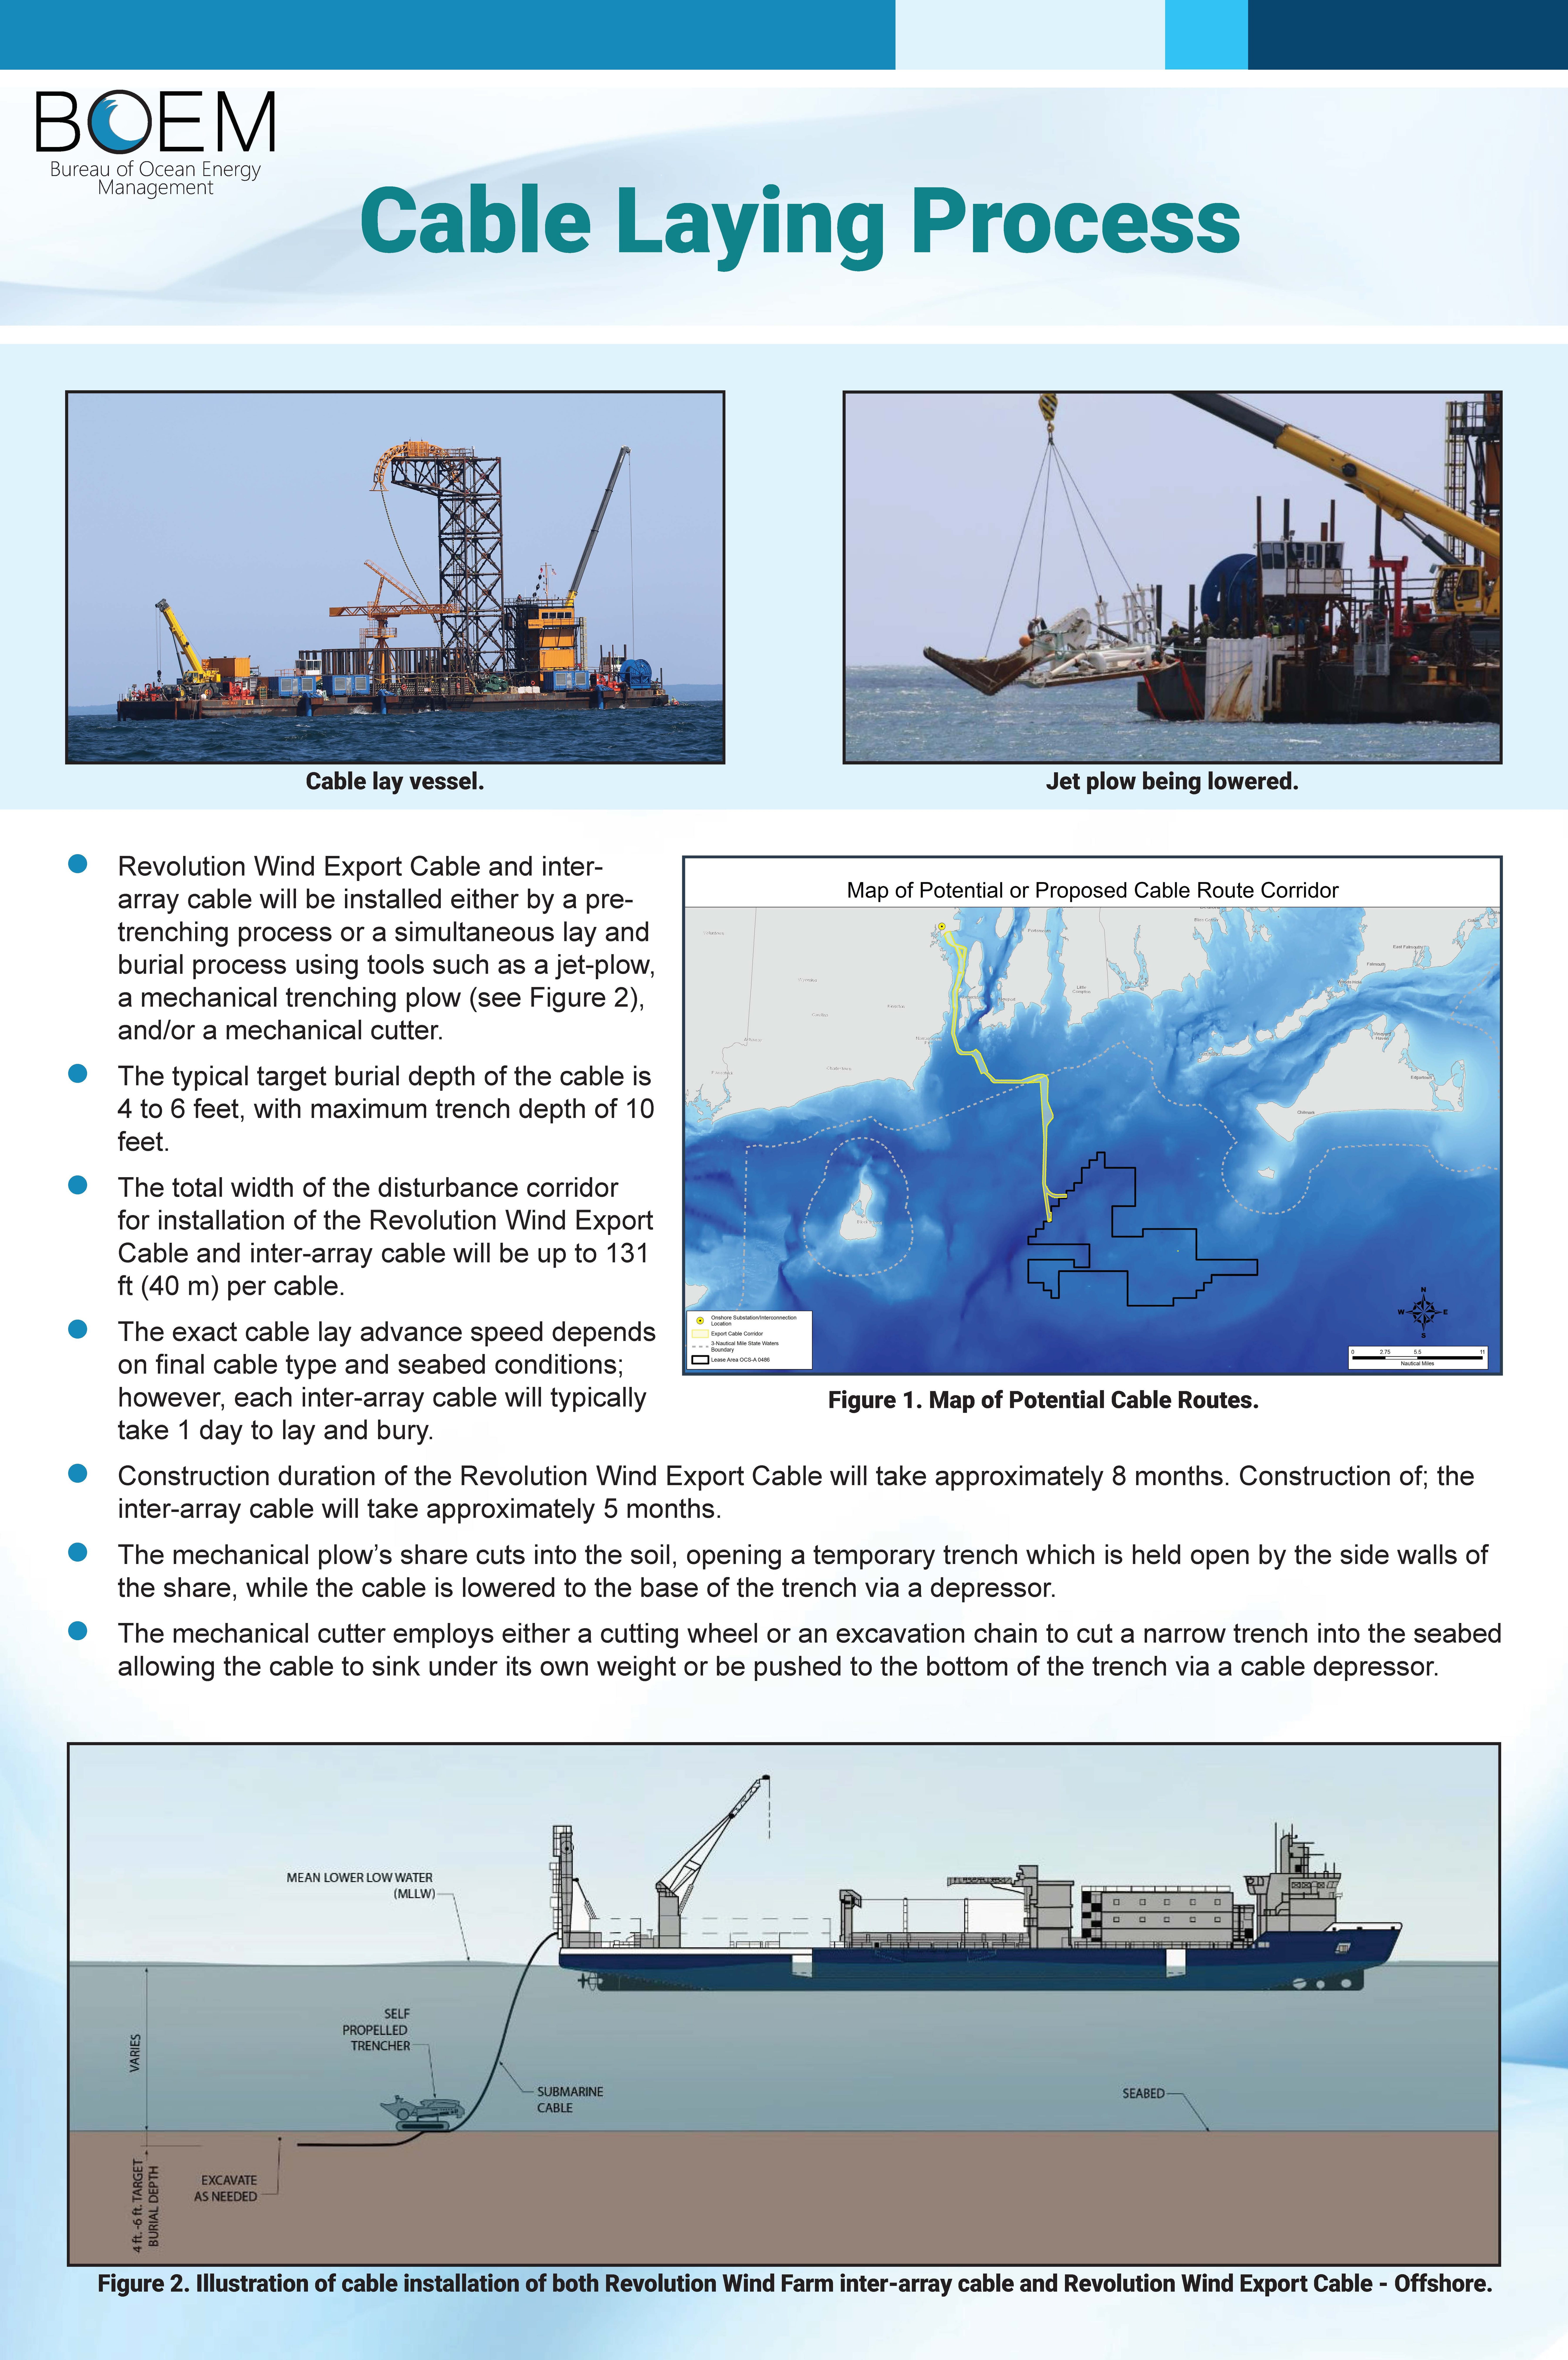 >Cable Laying Poster